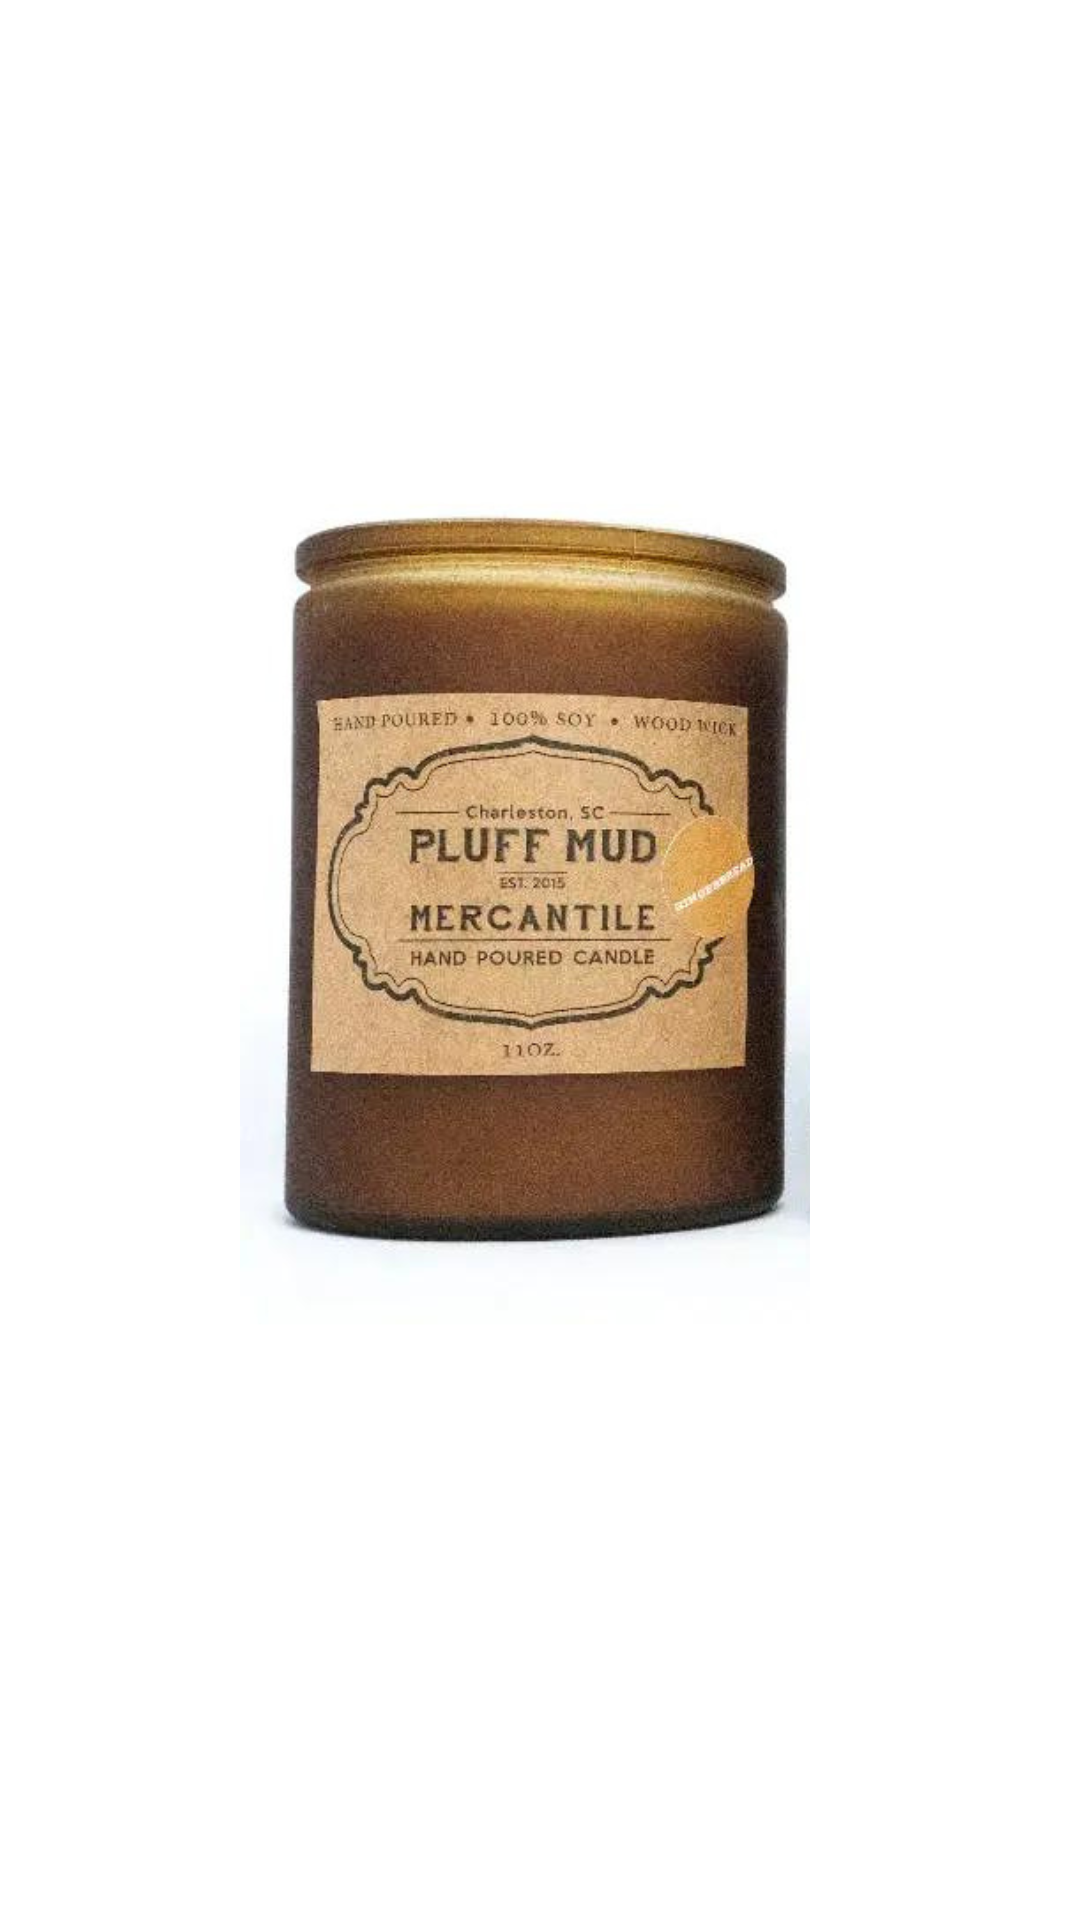 Magnolia Hand Poured Soy Candle - Pluff Mud Mercantile